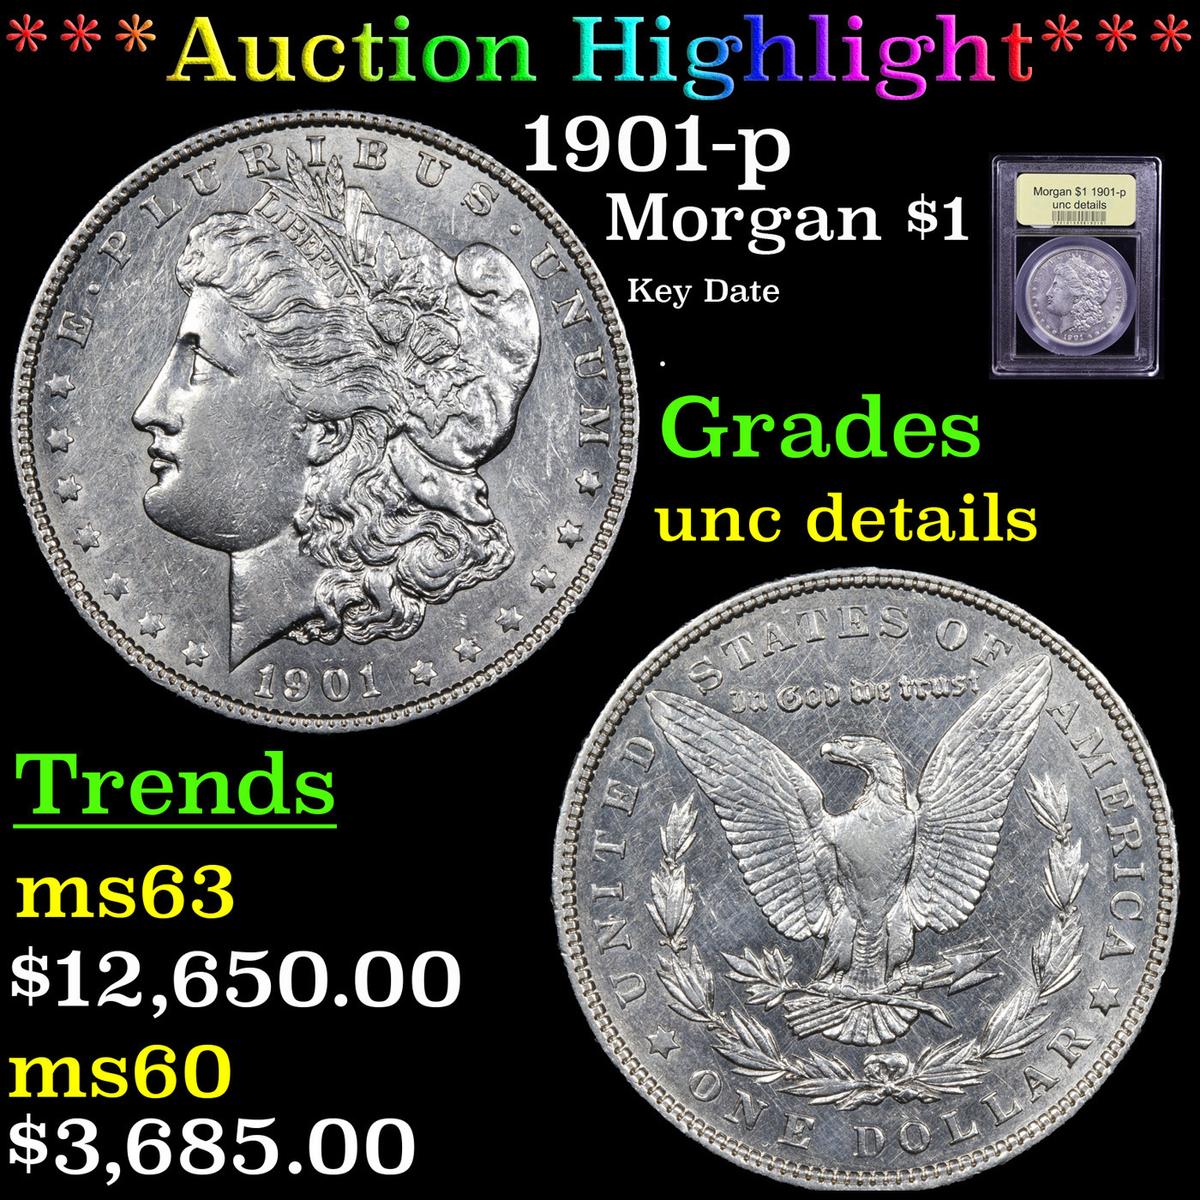 ***Auction Highlight*** 1901-p Morgan Dollar $1 Graded Unc Details By USCG (fc)